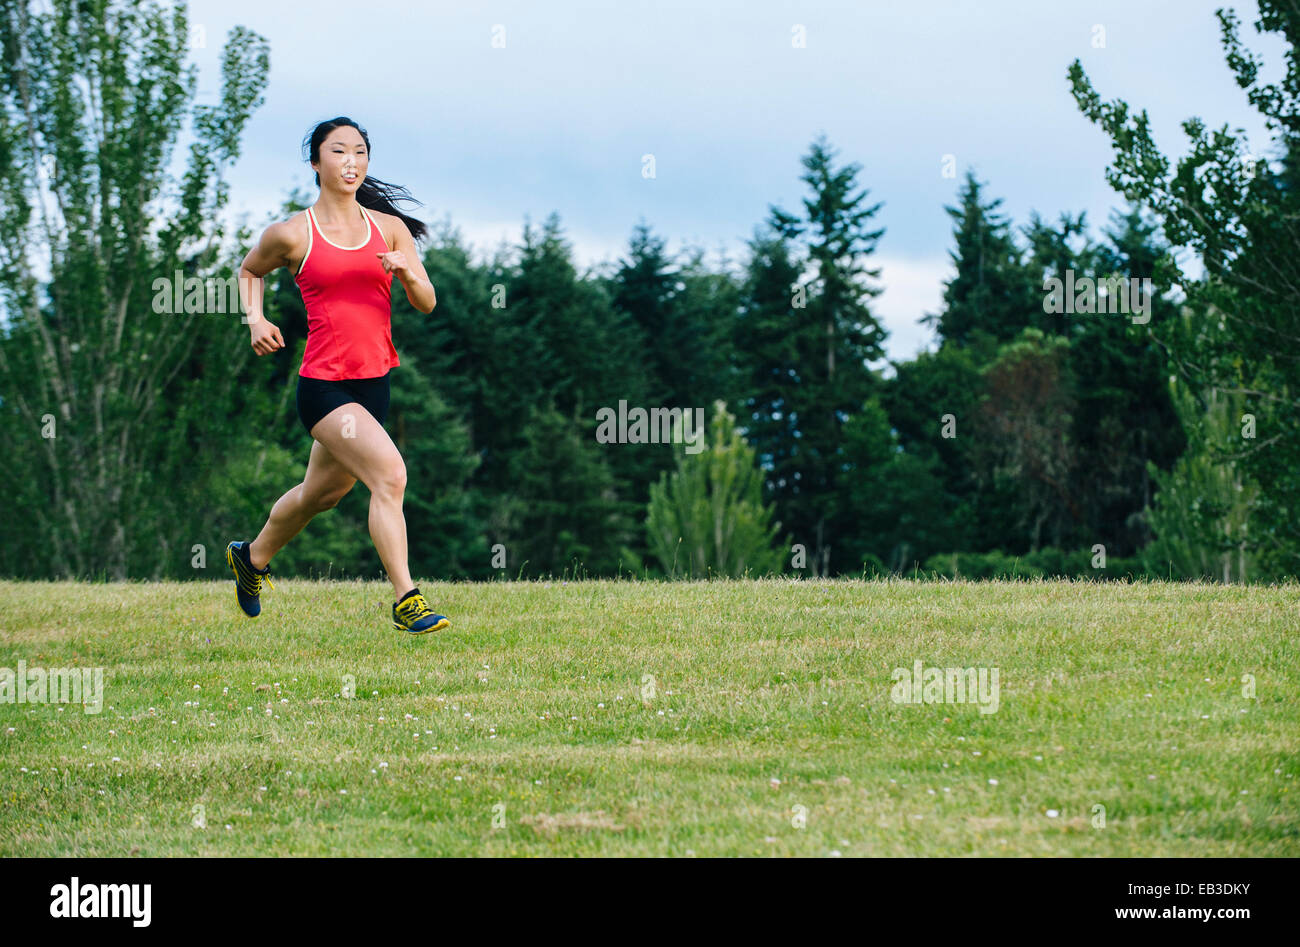 Korean woman running in field Banque D'Images